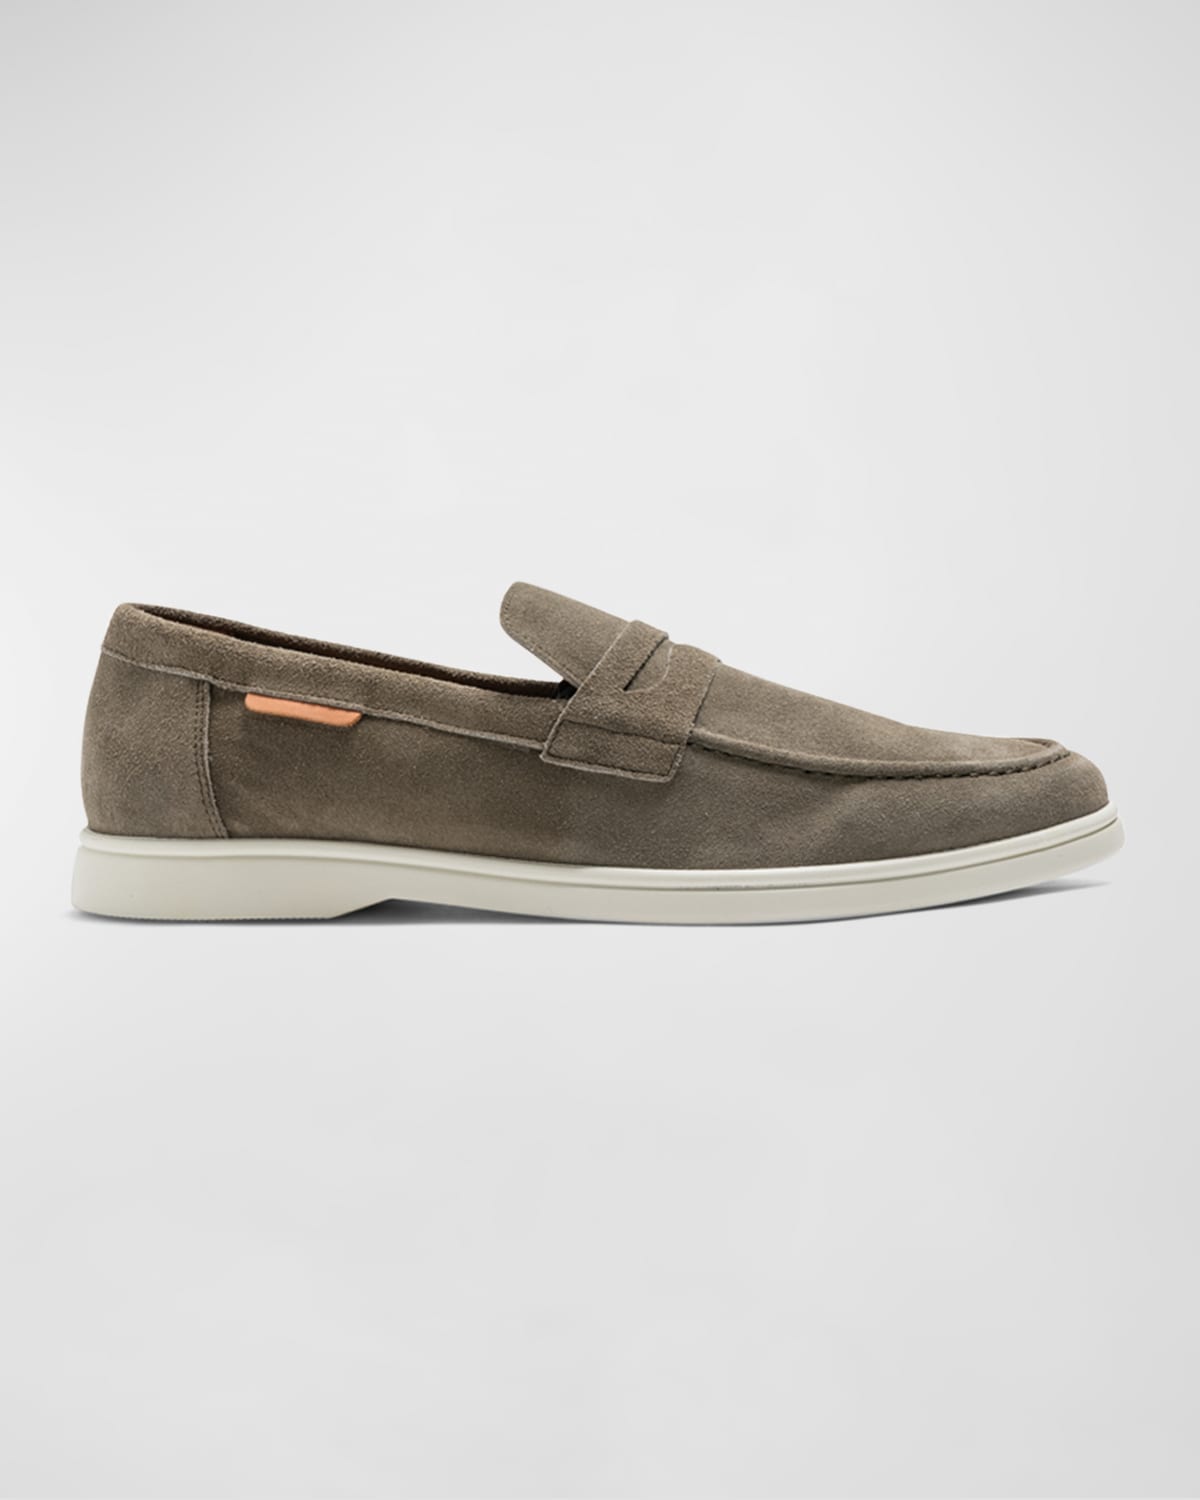 Men's Moana Soft Suede Penny Loafers